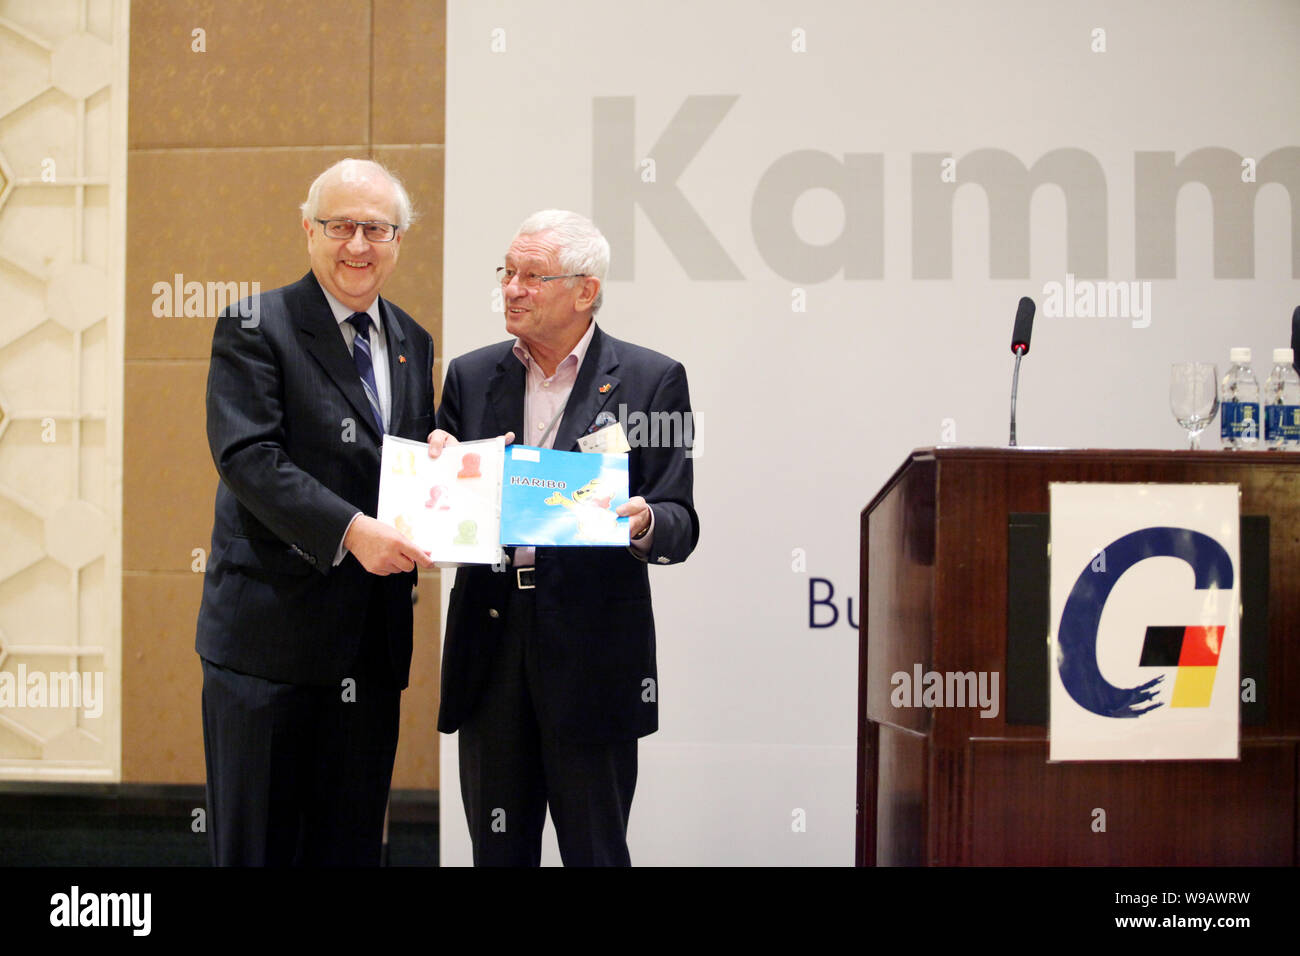 German Economy Minister Rainer Bruederle, left, is presented gifts by Mr. Manfred Knopp at a breakfast event of the German Chamber of Commerce in Shan Stock Photo